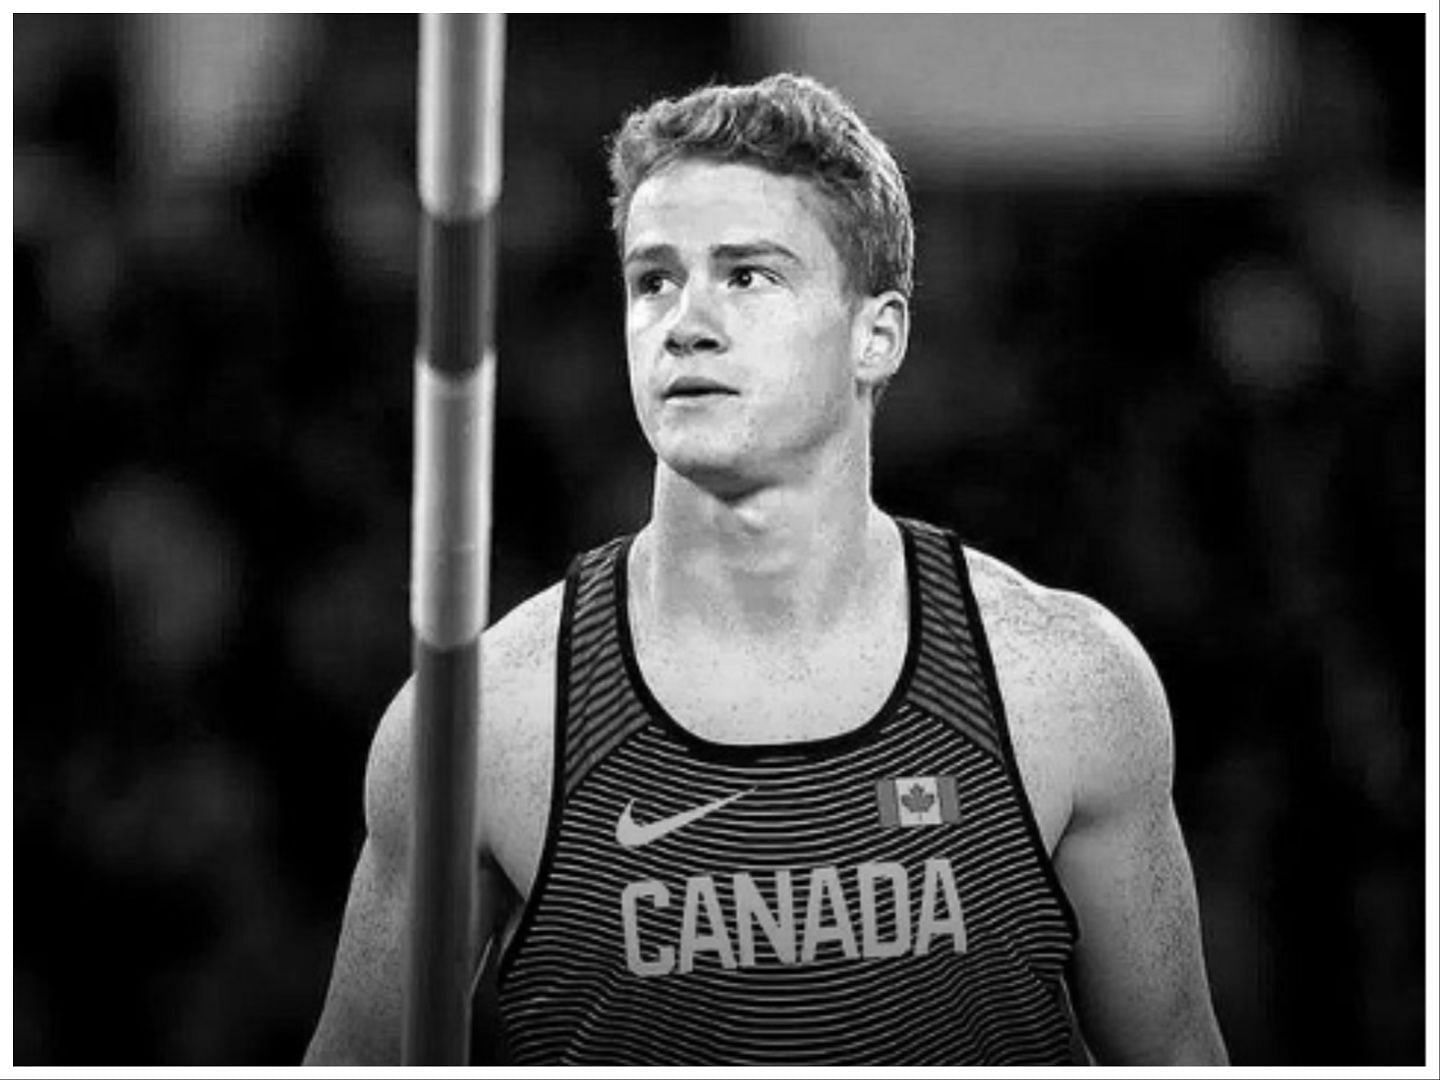 Shawn Barber passes away at age of 29 (Image via Instagram)